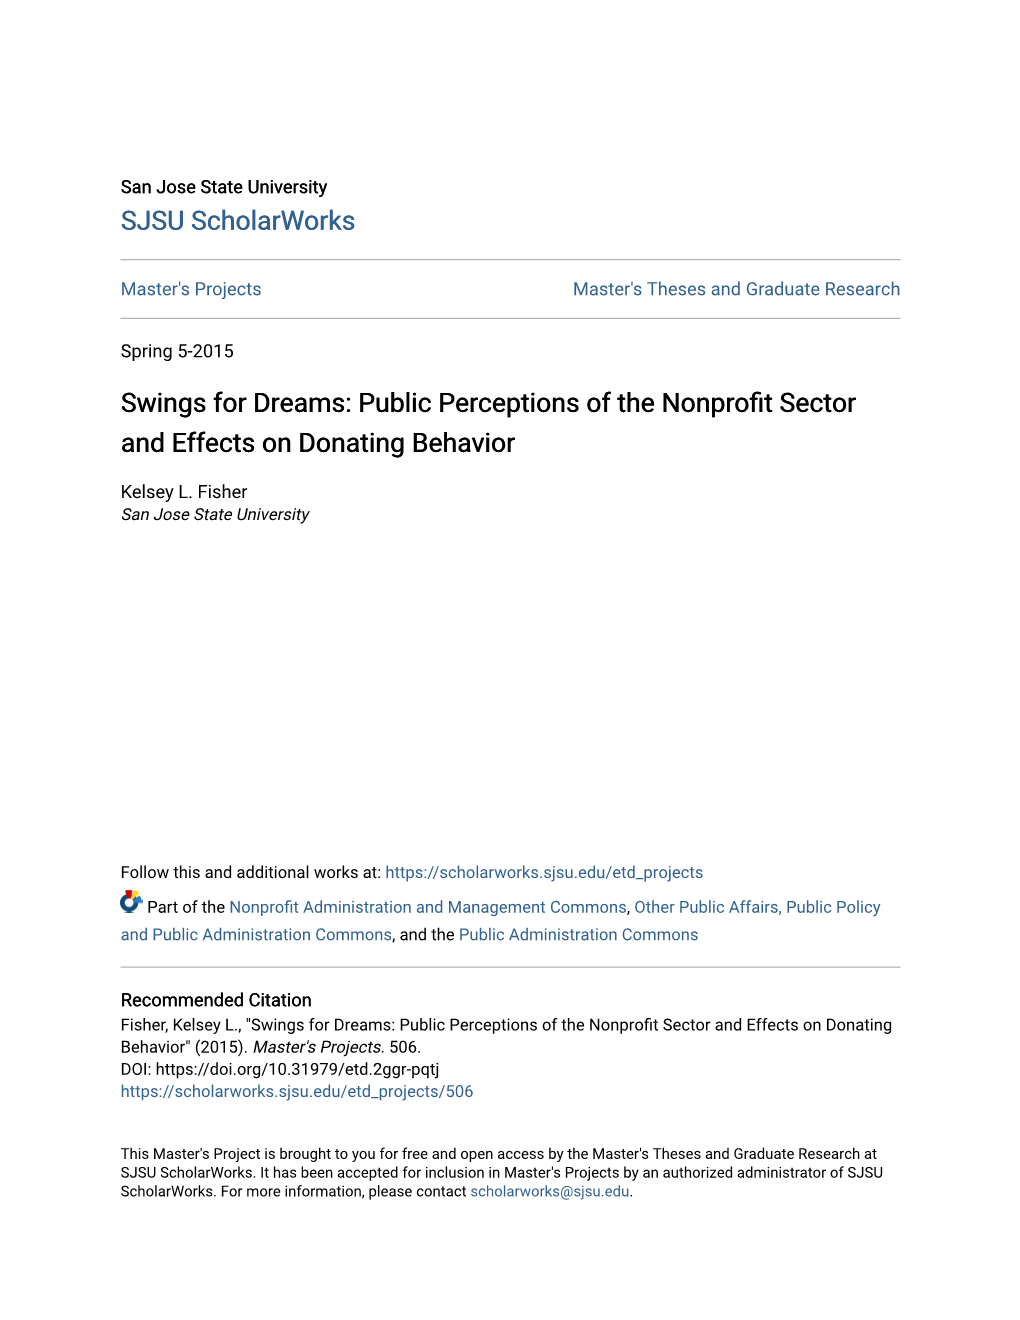 Swings for Dreams: Public Perceptions of the Nonprofit Sector and Effects on Donating Behavior